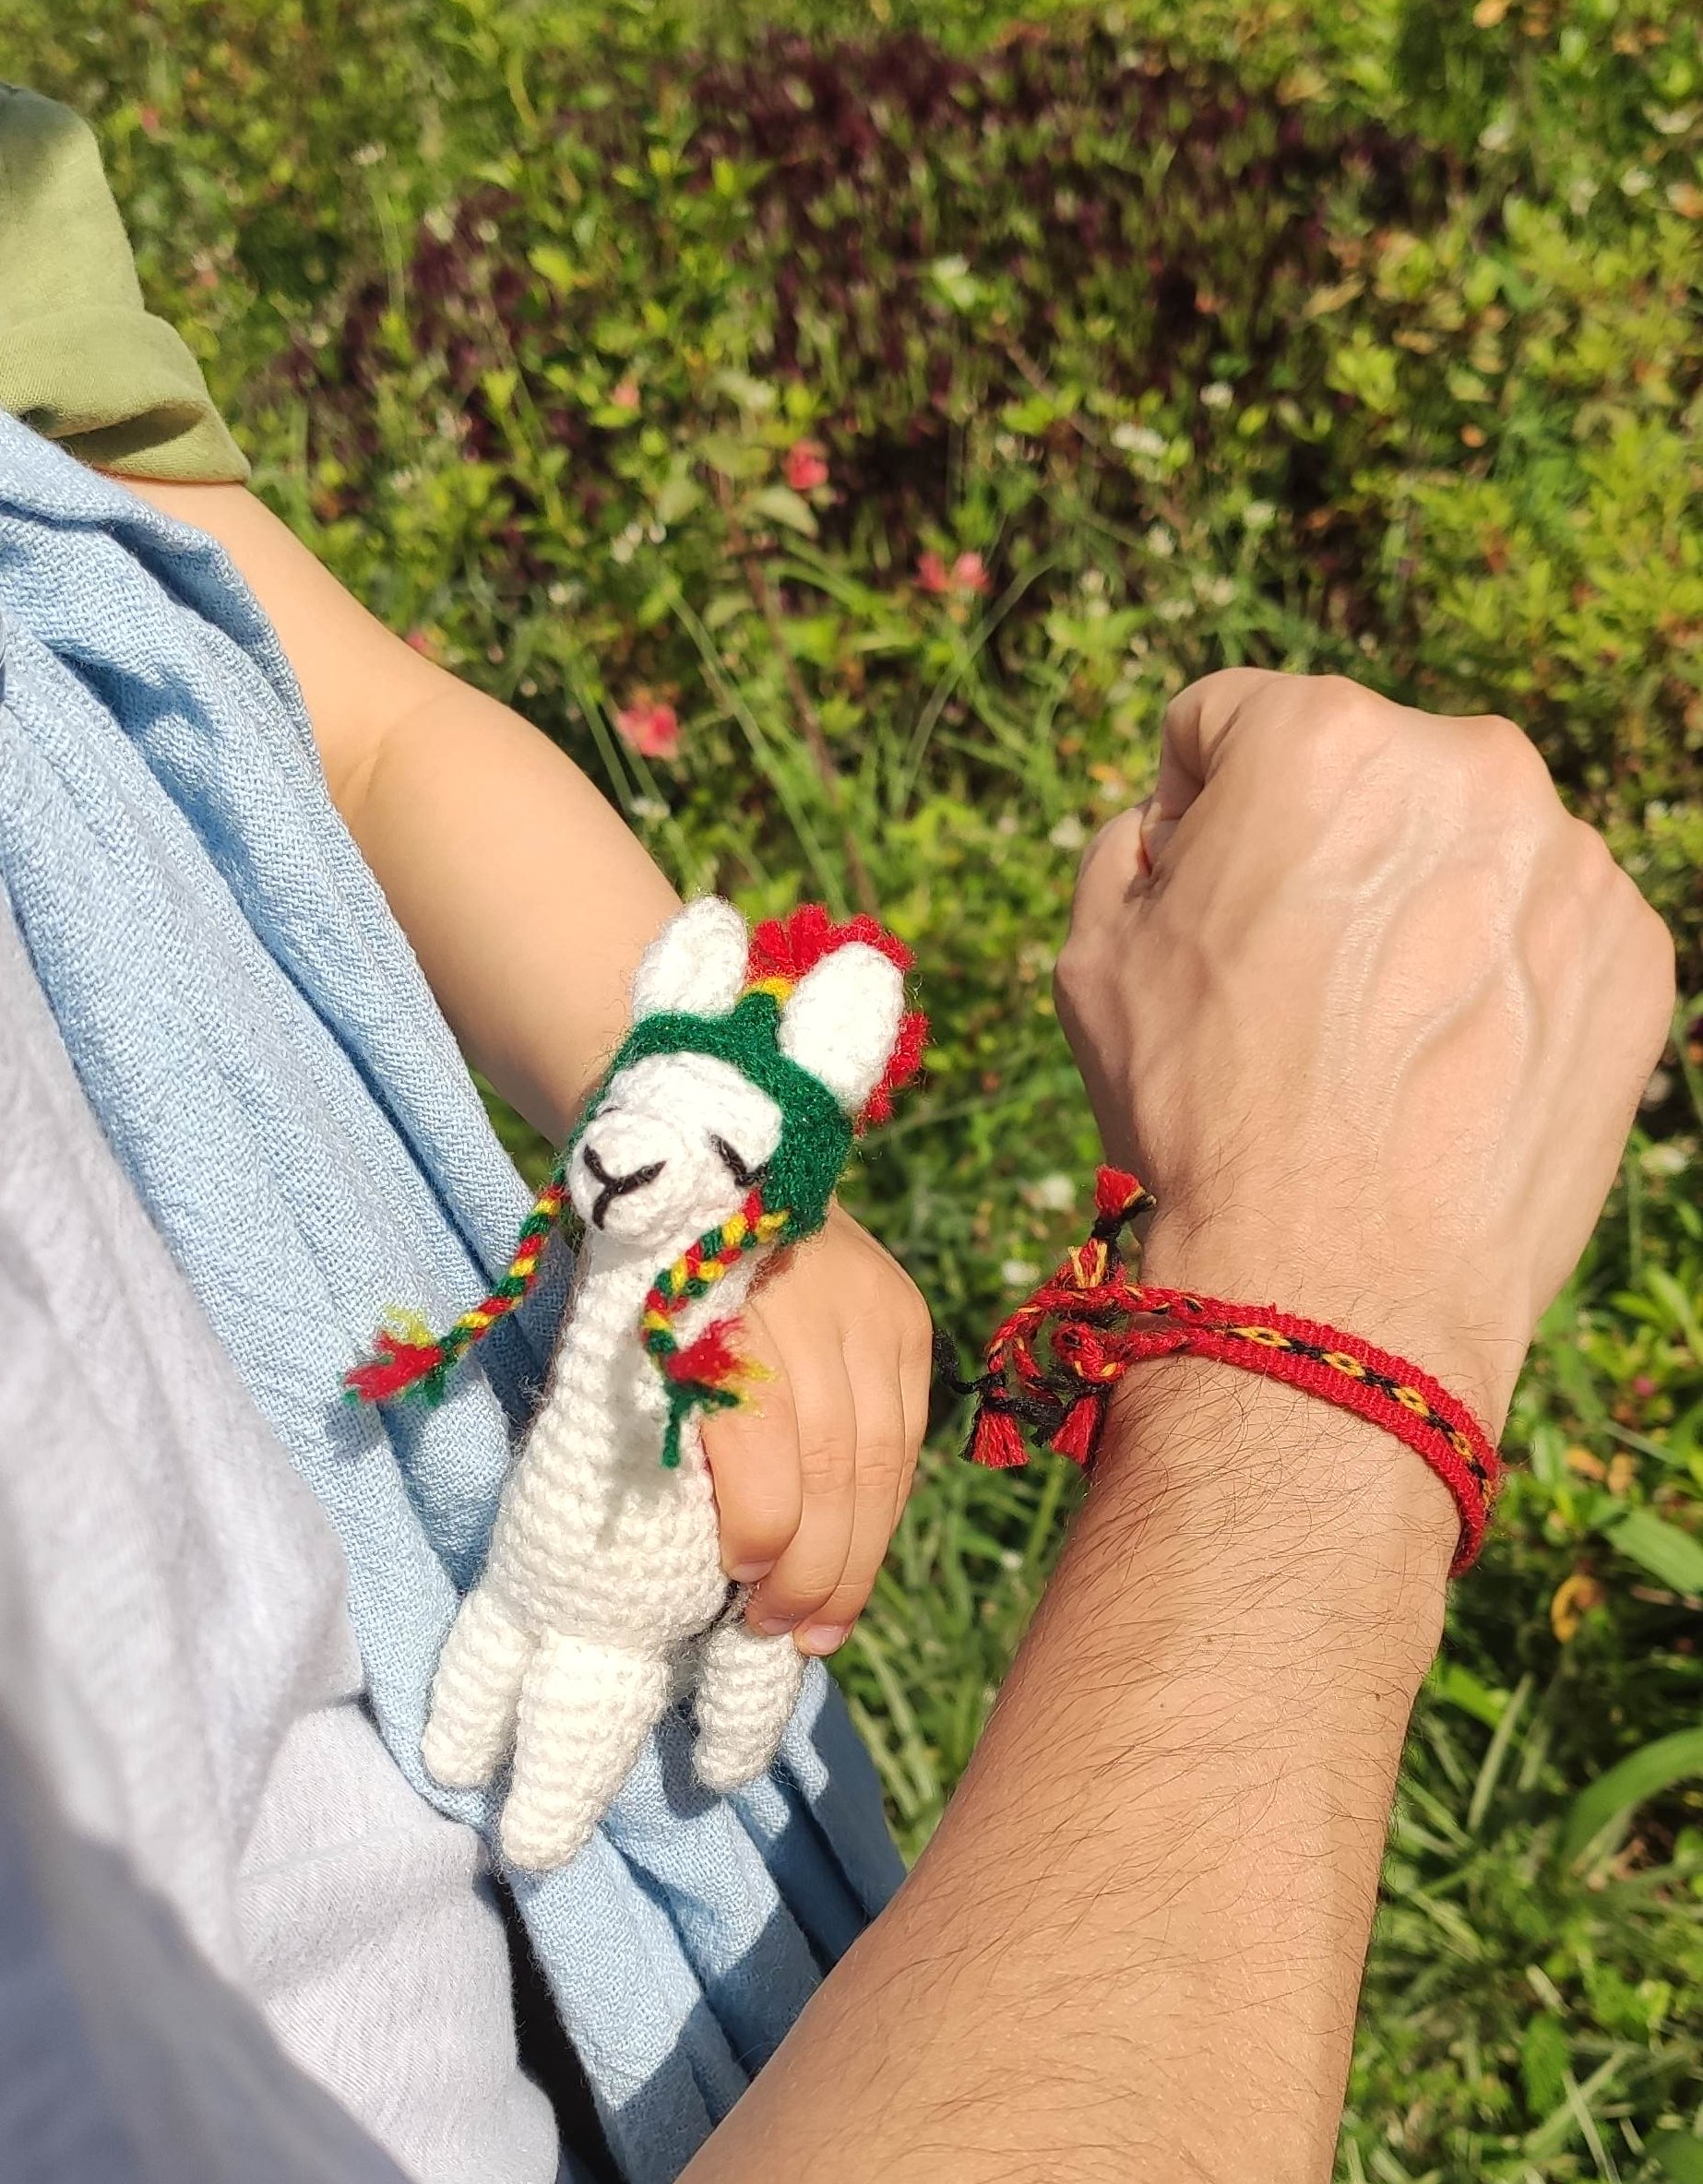 Bolivian themed bracelet on my wrist and toy llama on a baby's hand